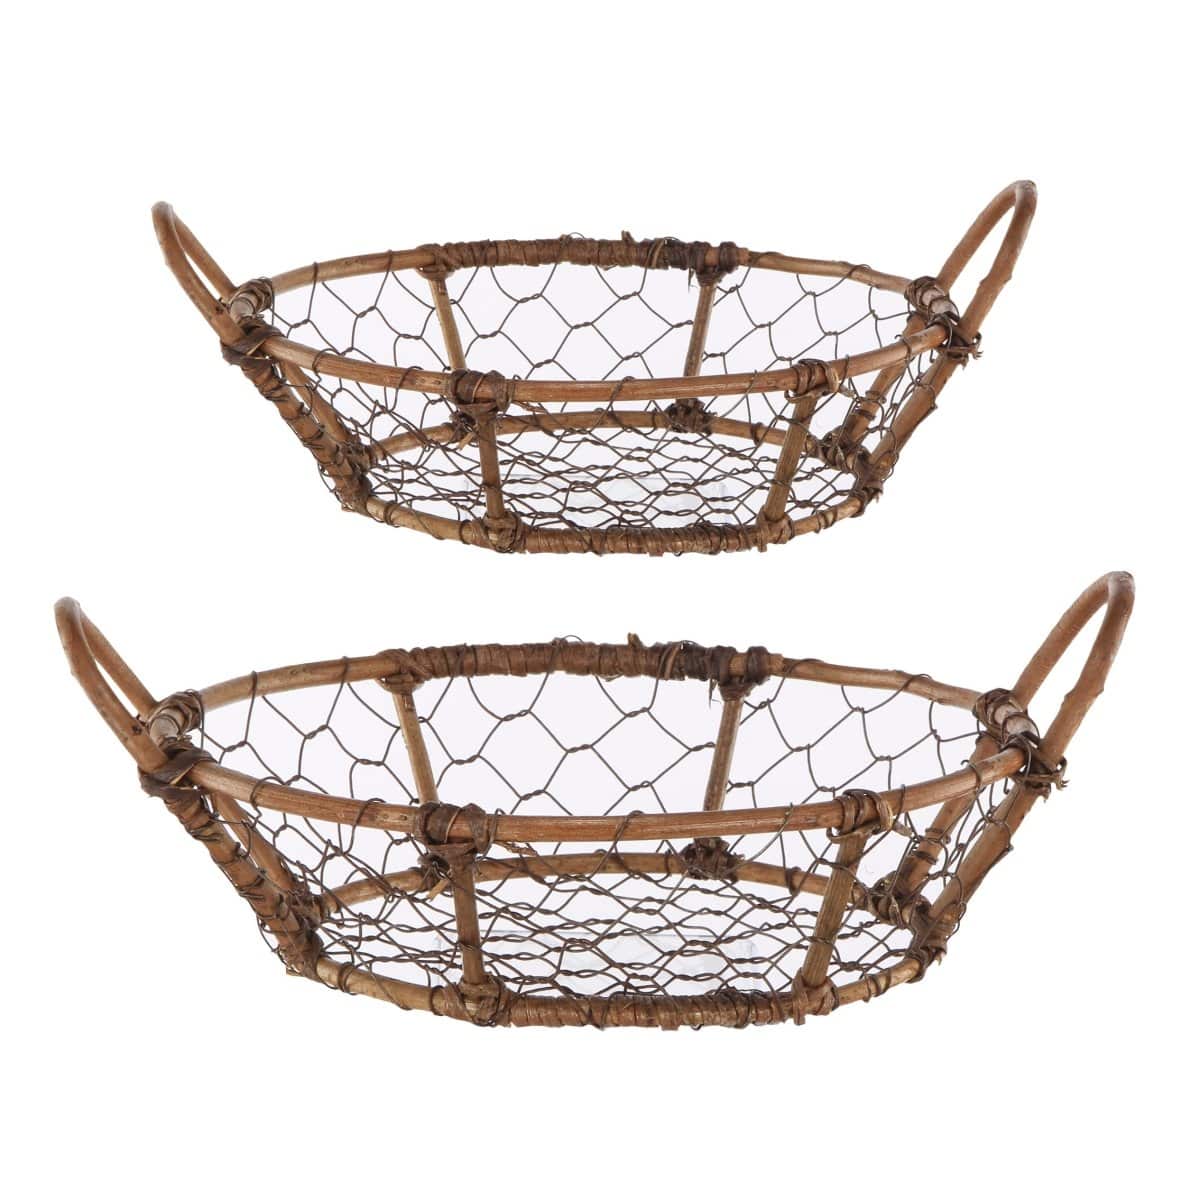 AB-39309 S/2 RATTAN AND METAL BASKETS picket and rail